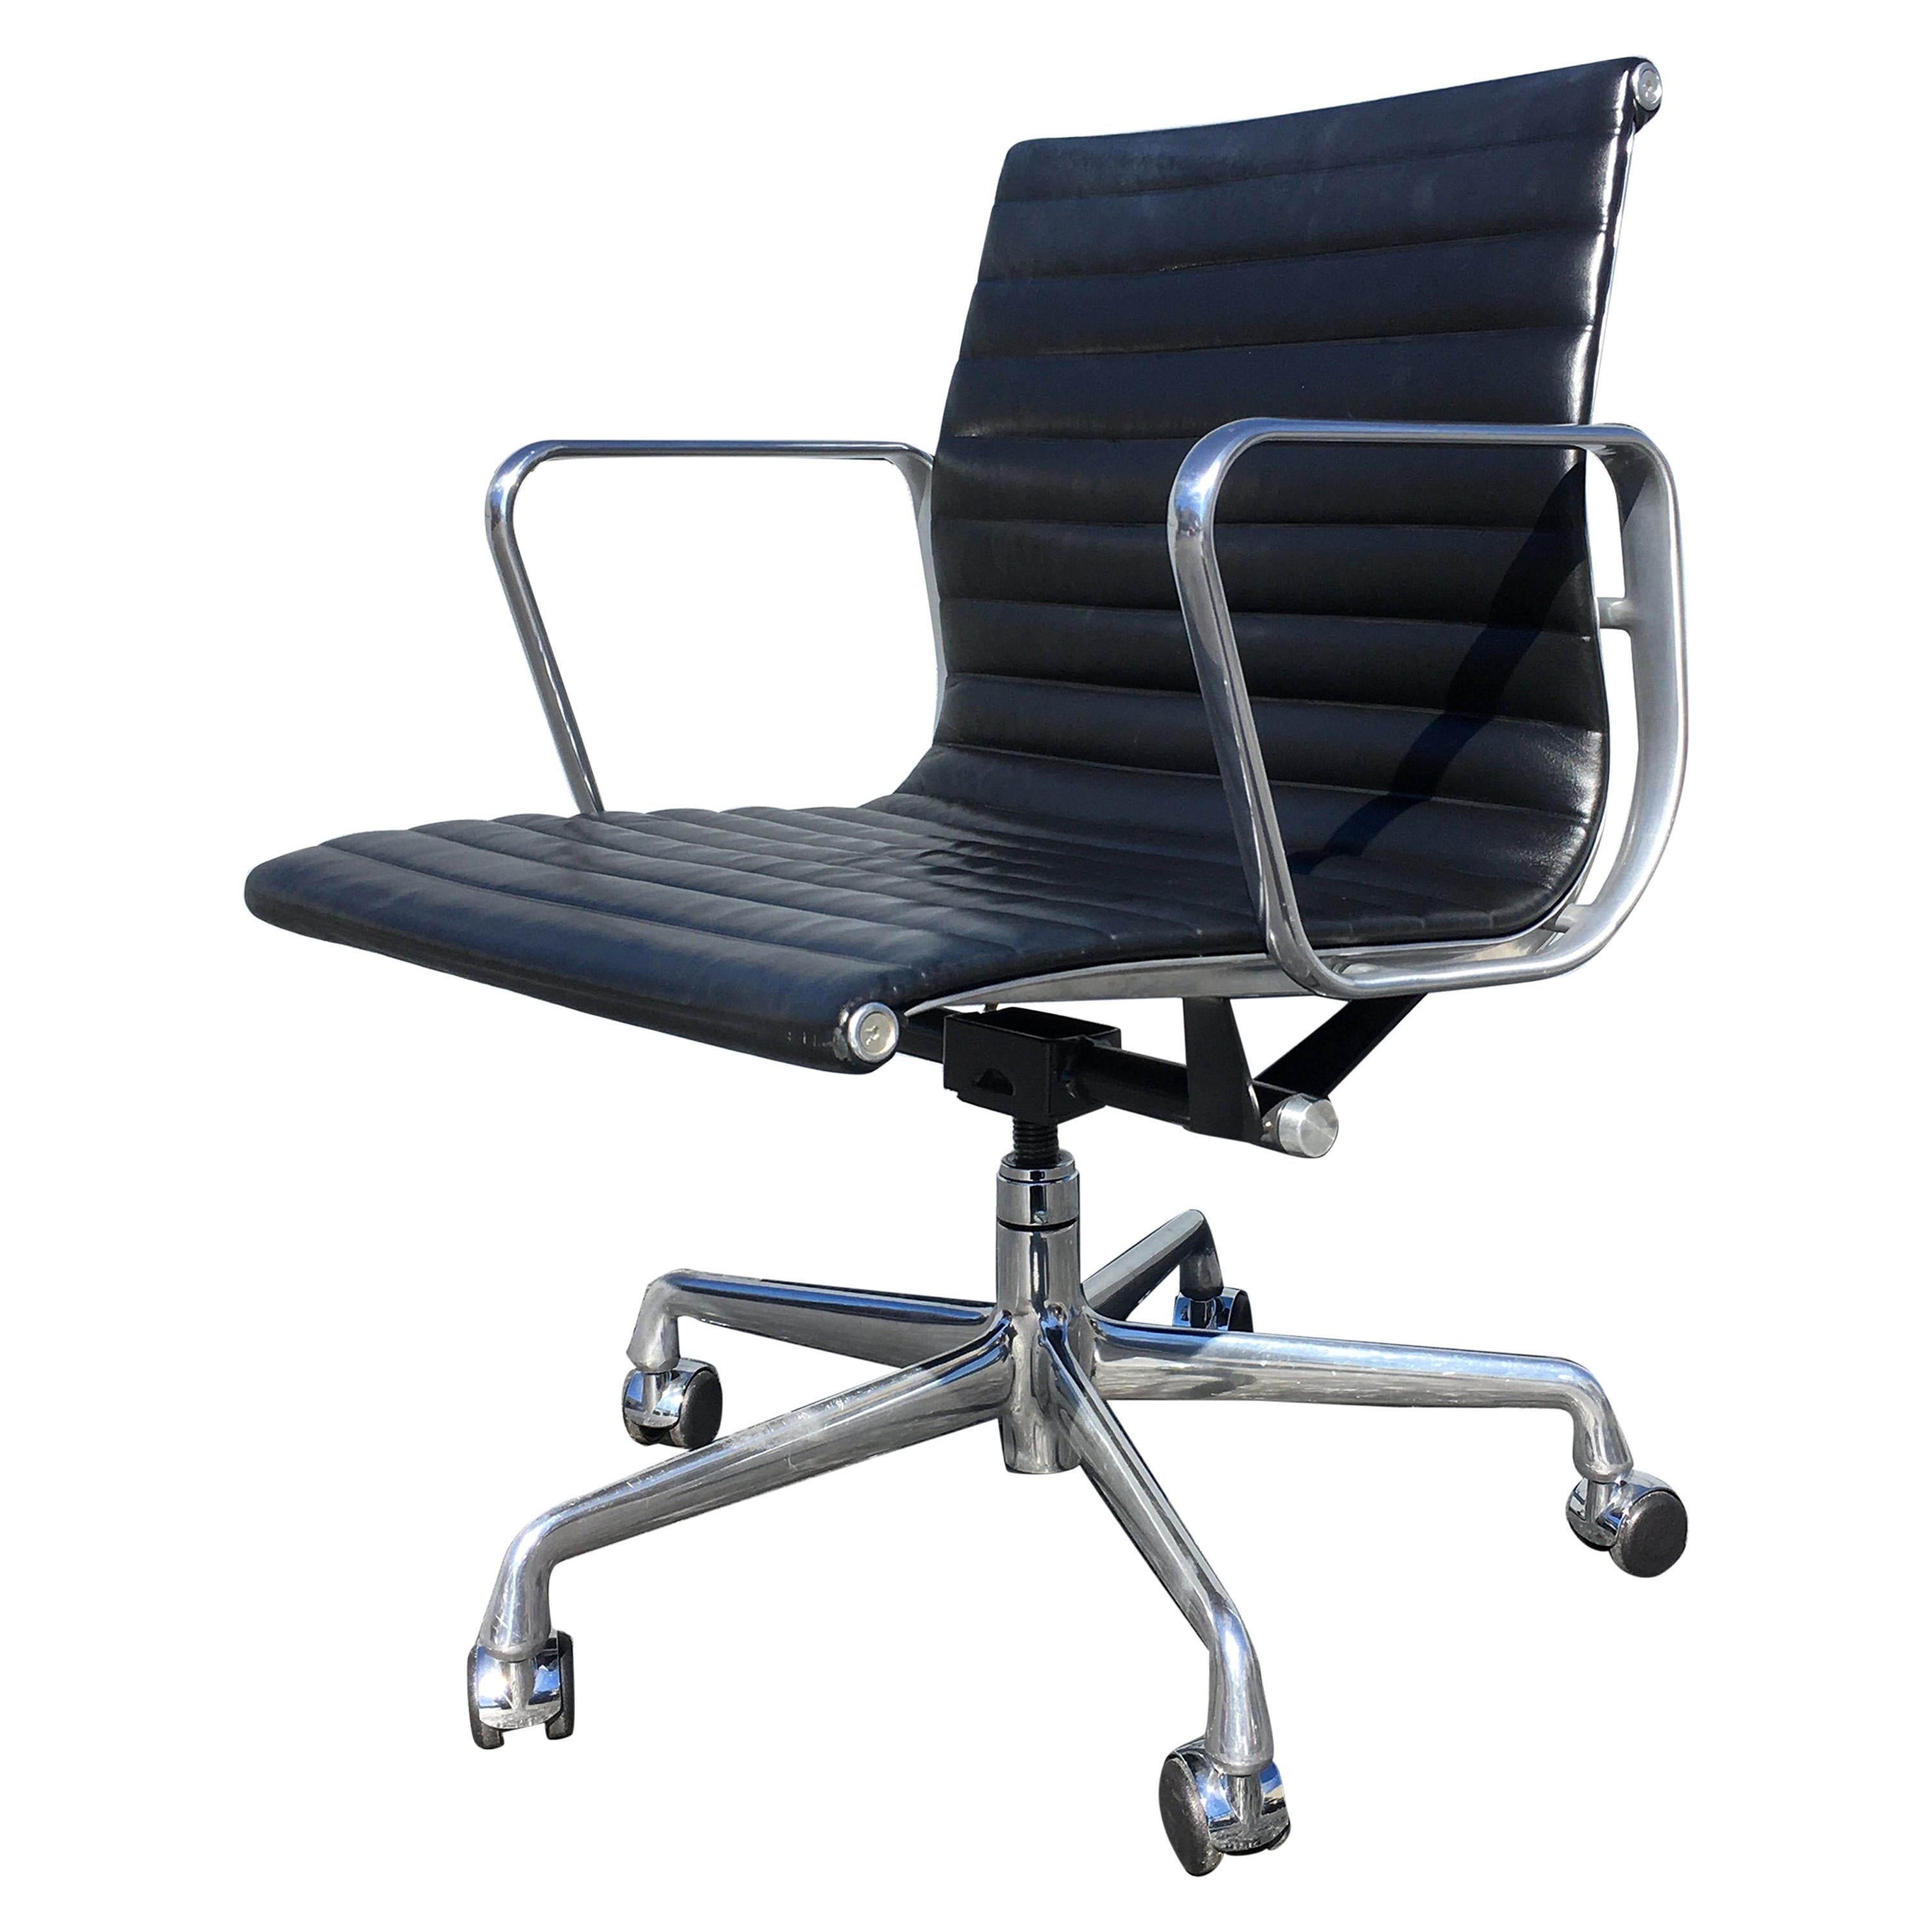 Eames Aluminium Management Chairs in Black Leather for Herman Miller